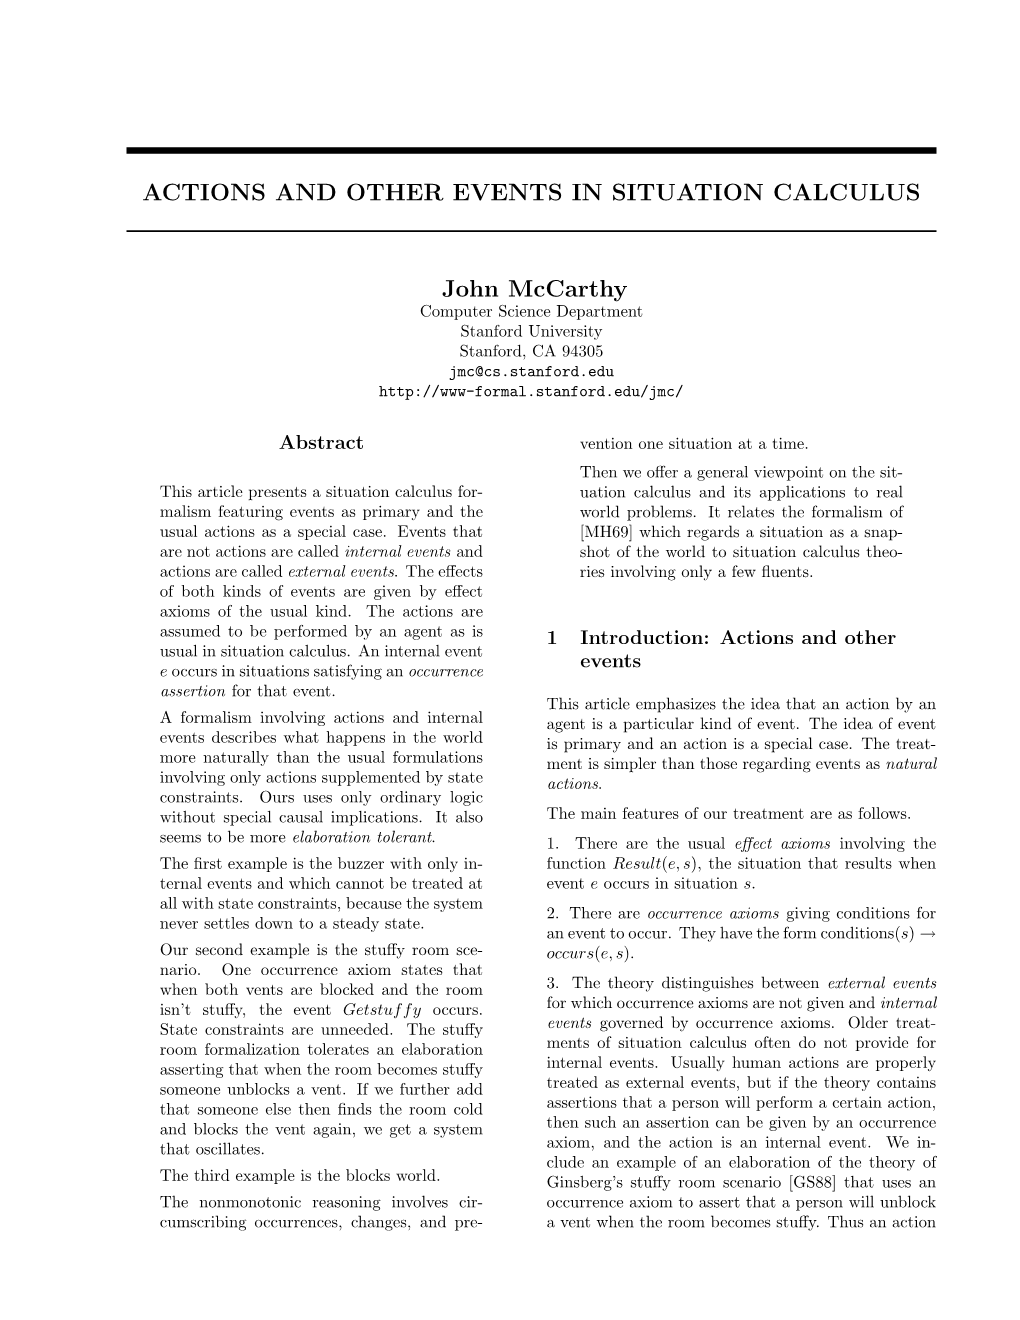 Actions and Other Events in Situation Calculus